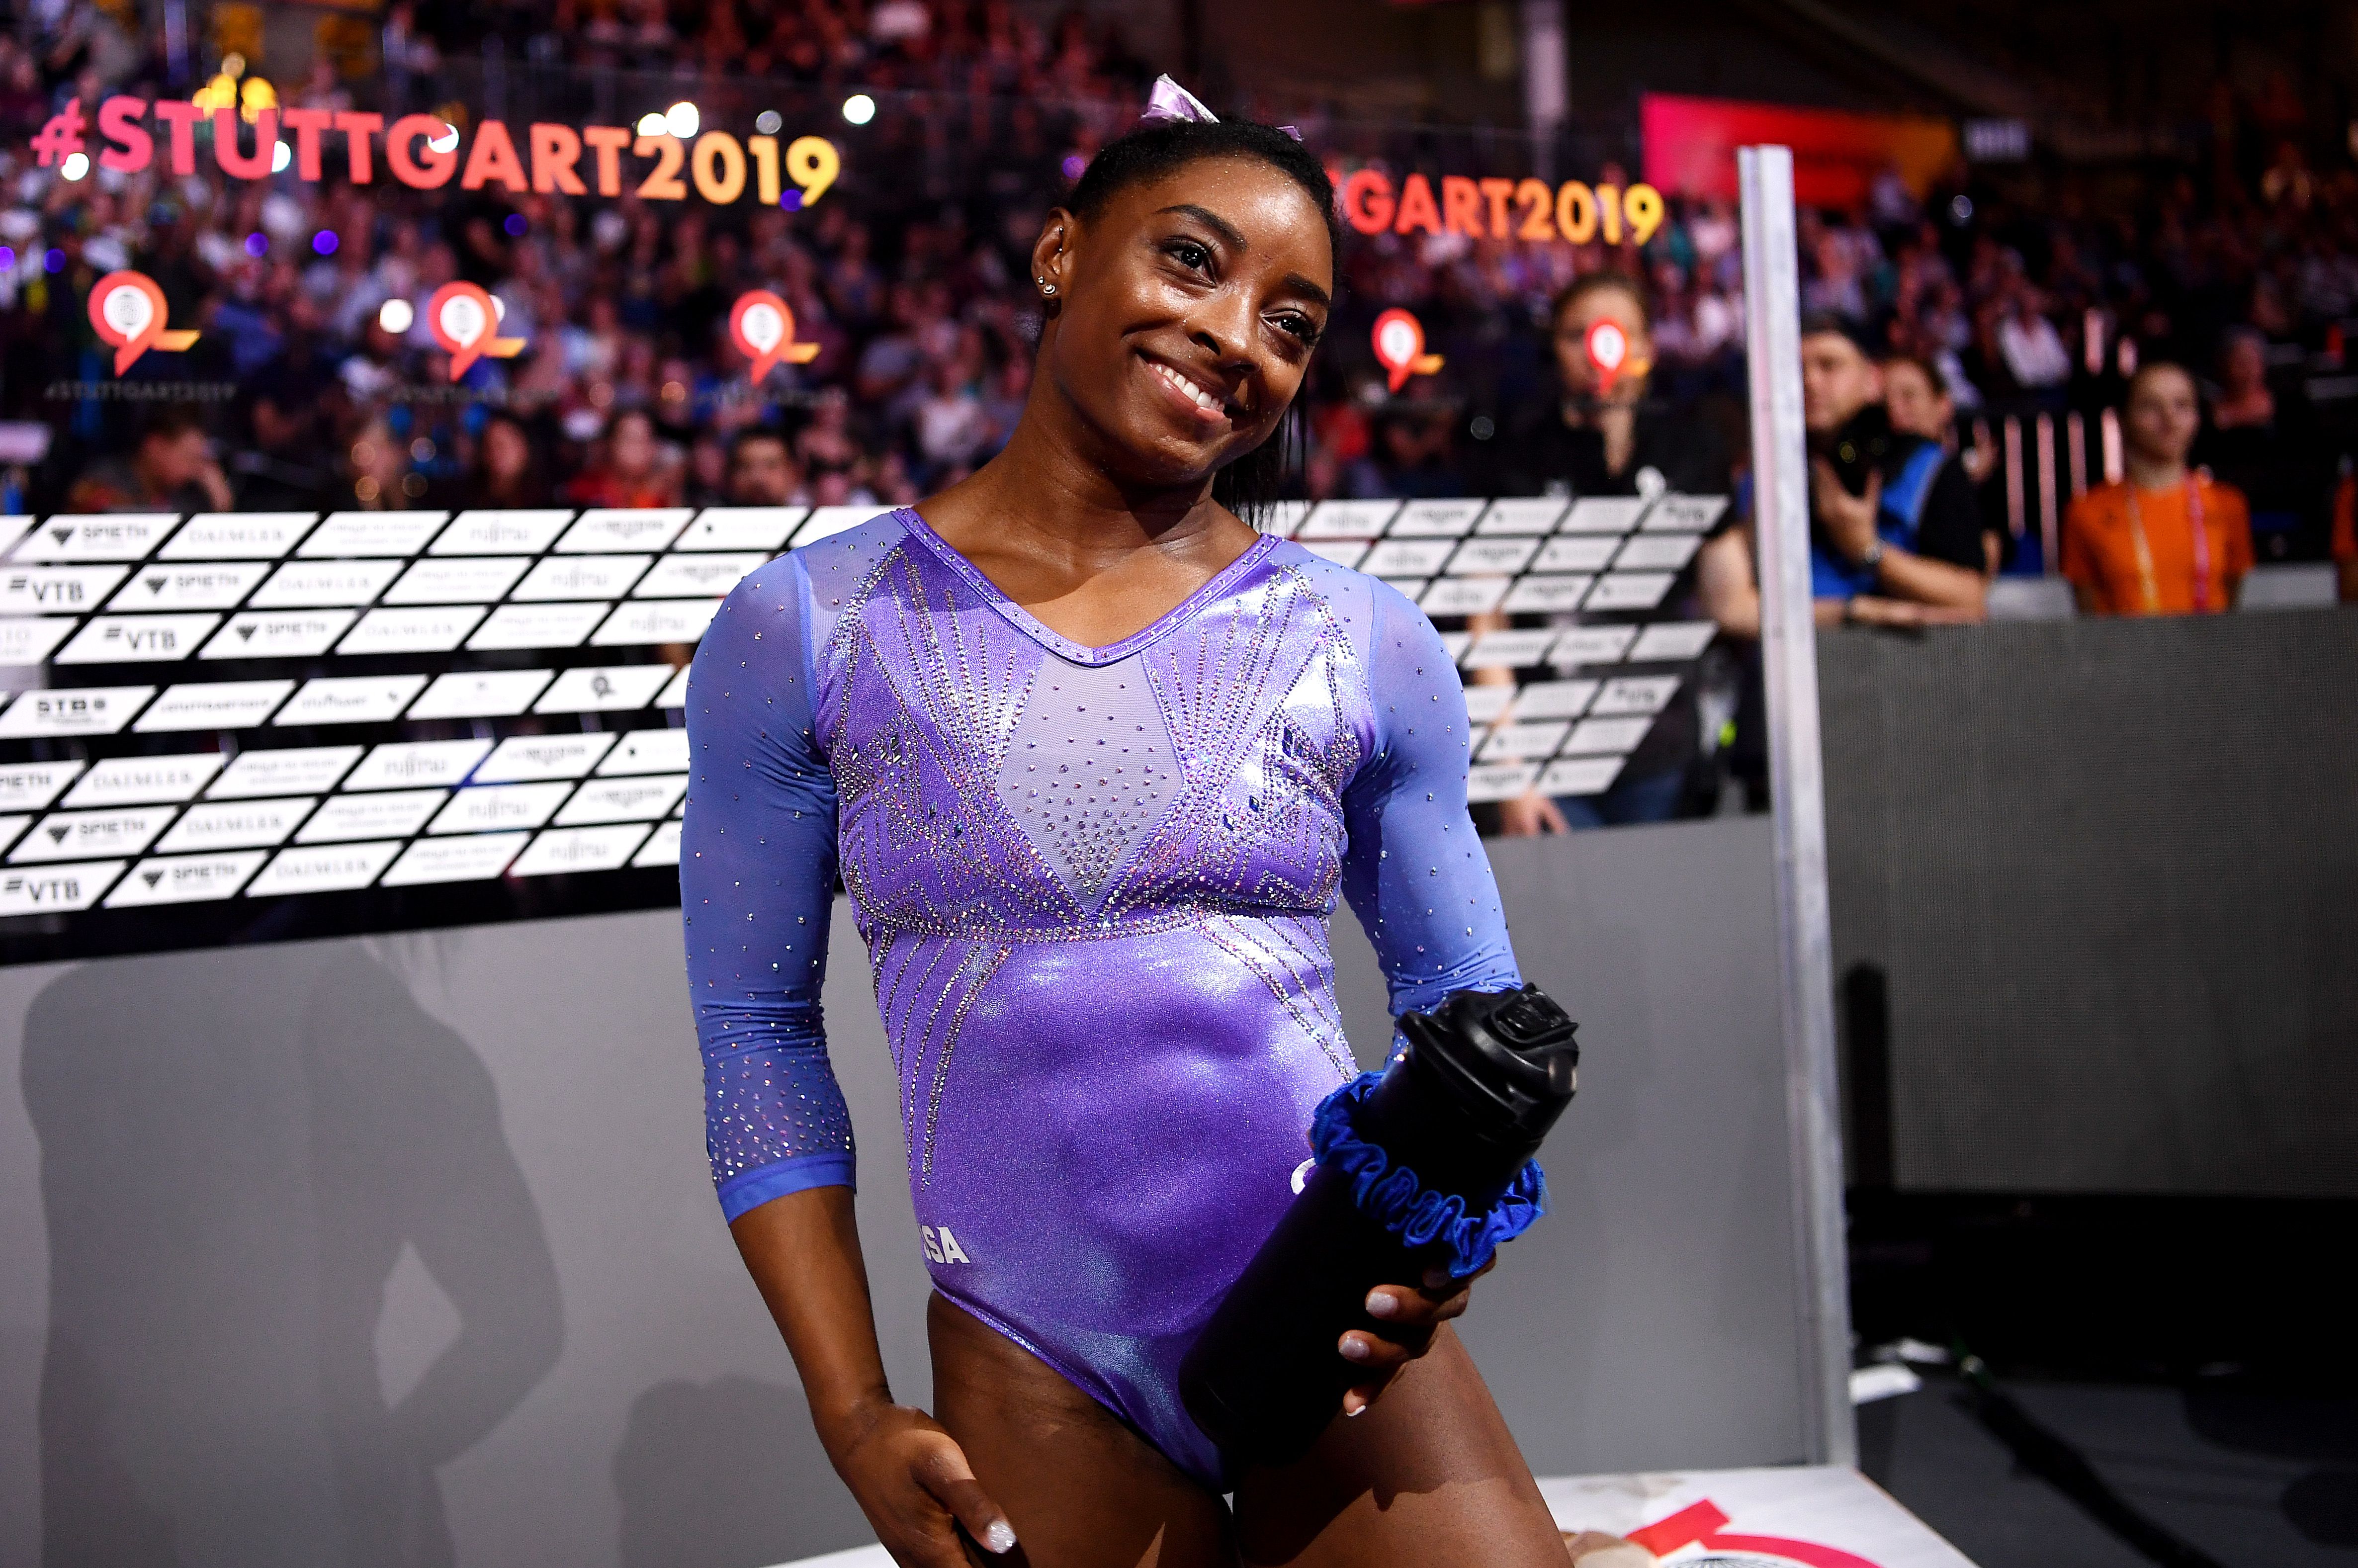 Simone Biles at the 49th FIG Artistic Gymnastics World Championships at Hanns-Martin-Schleyer-Halle on October 13, 2019 in Stuttgart, Germany. | Source: Getty Images